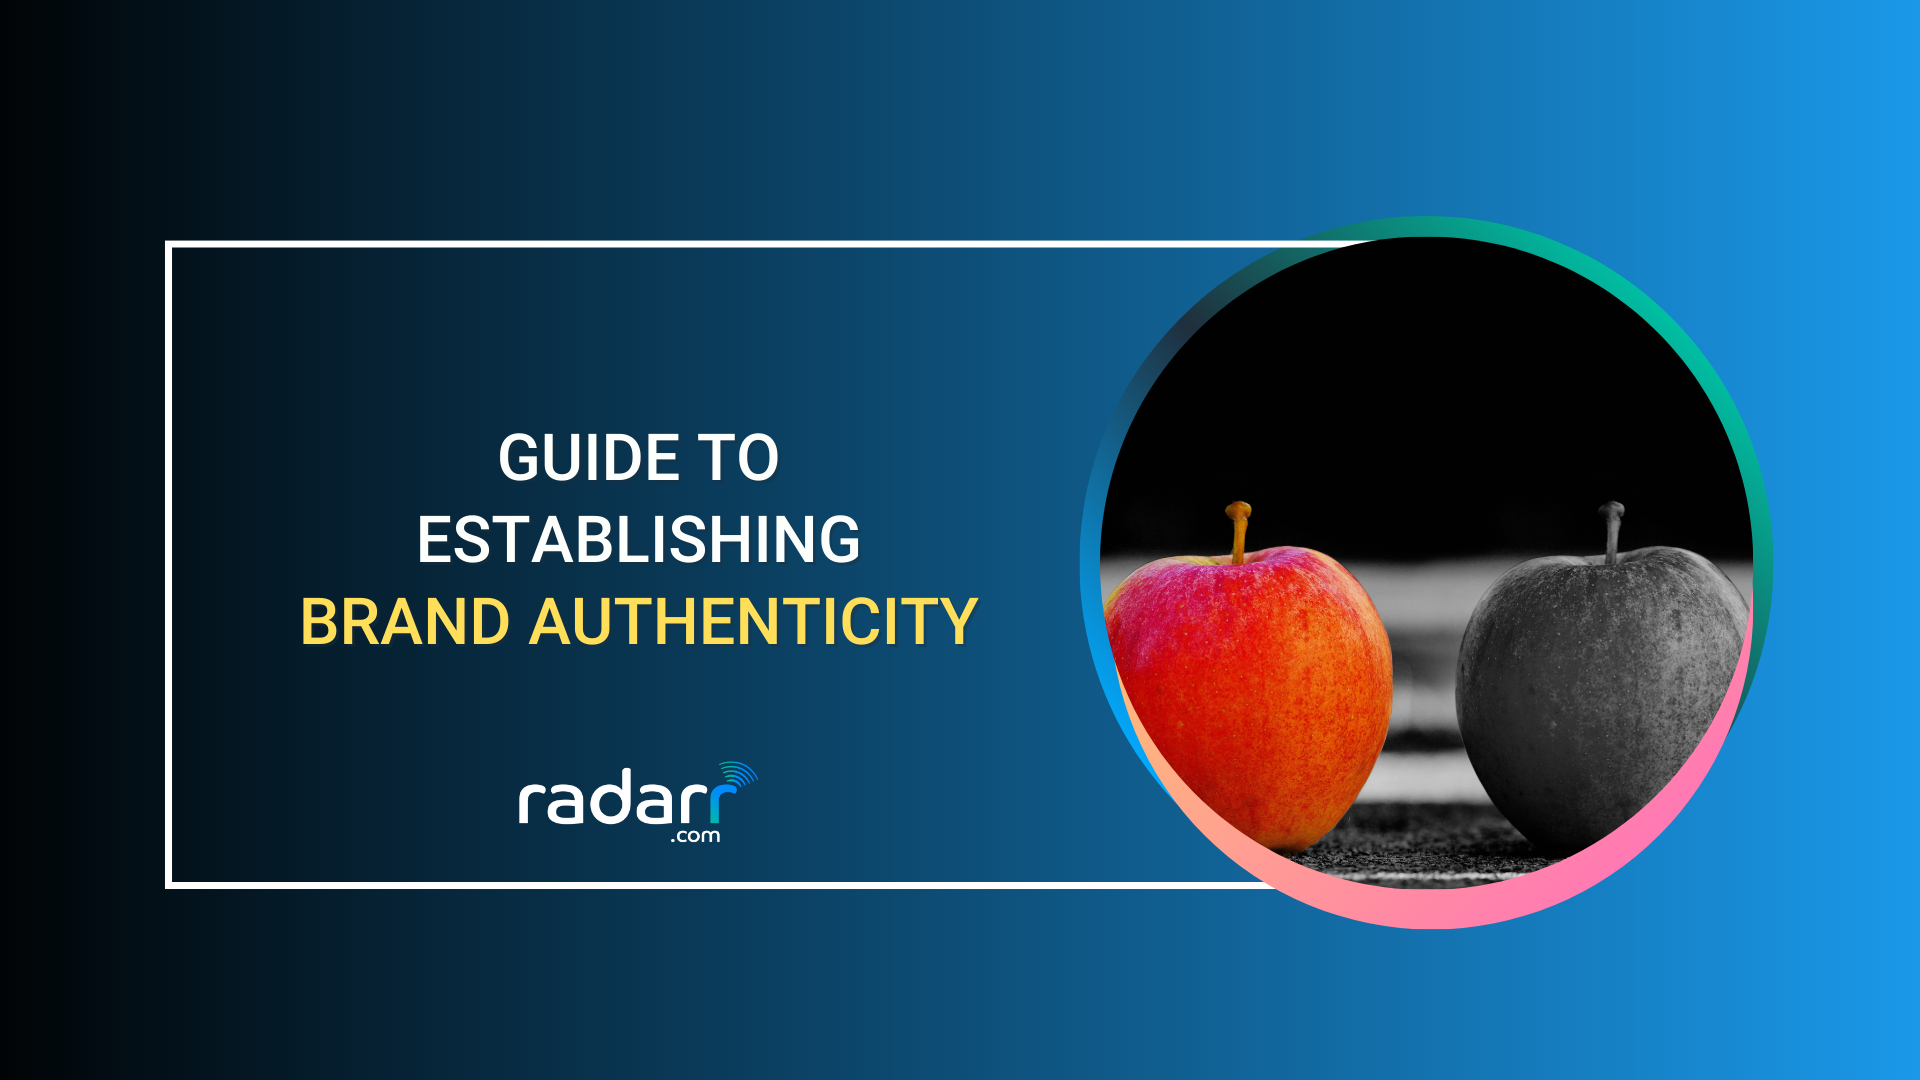 Guide to brand authenticity